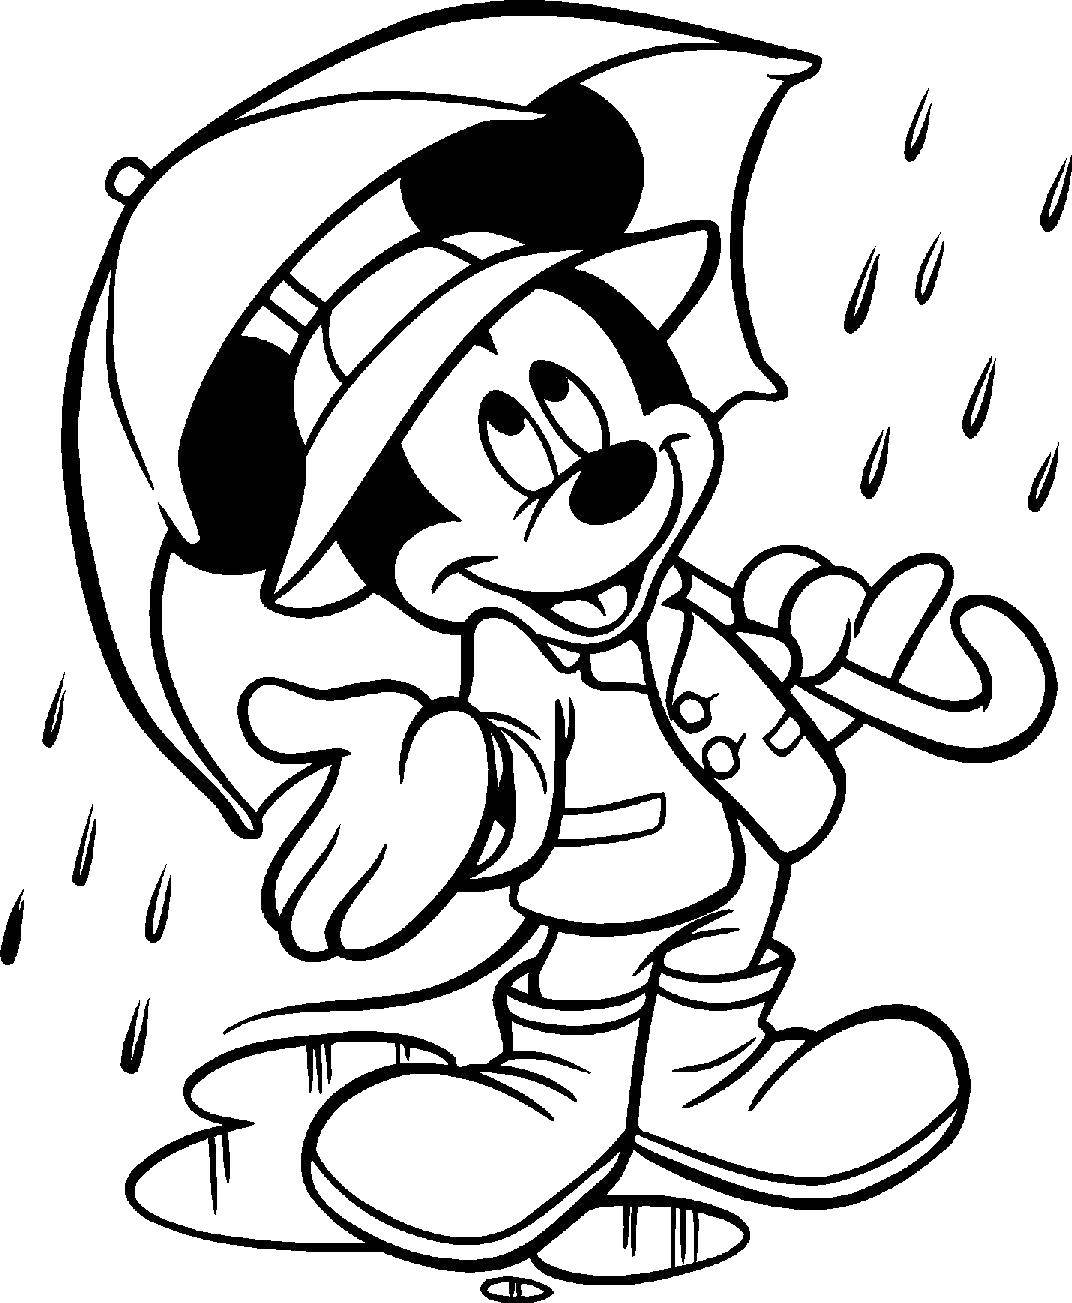 Coloring Mickey mouse under the rain. Category Disney coloring pages. Tags:  Disney, Mickey Mouse.